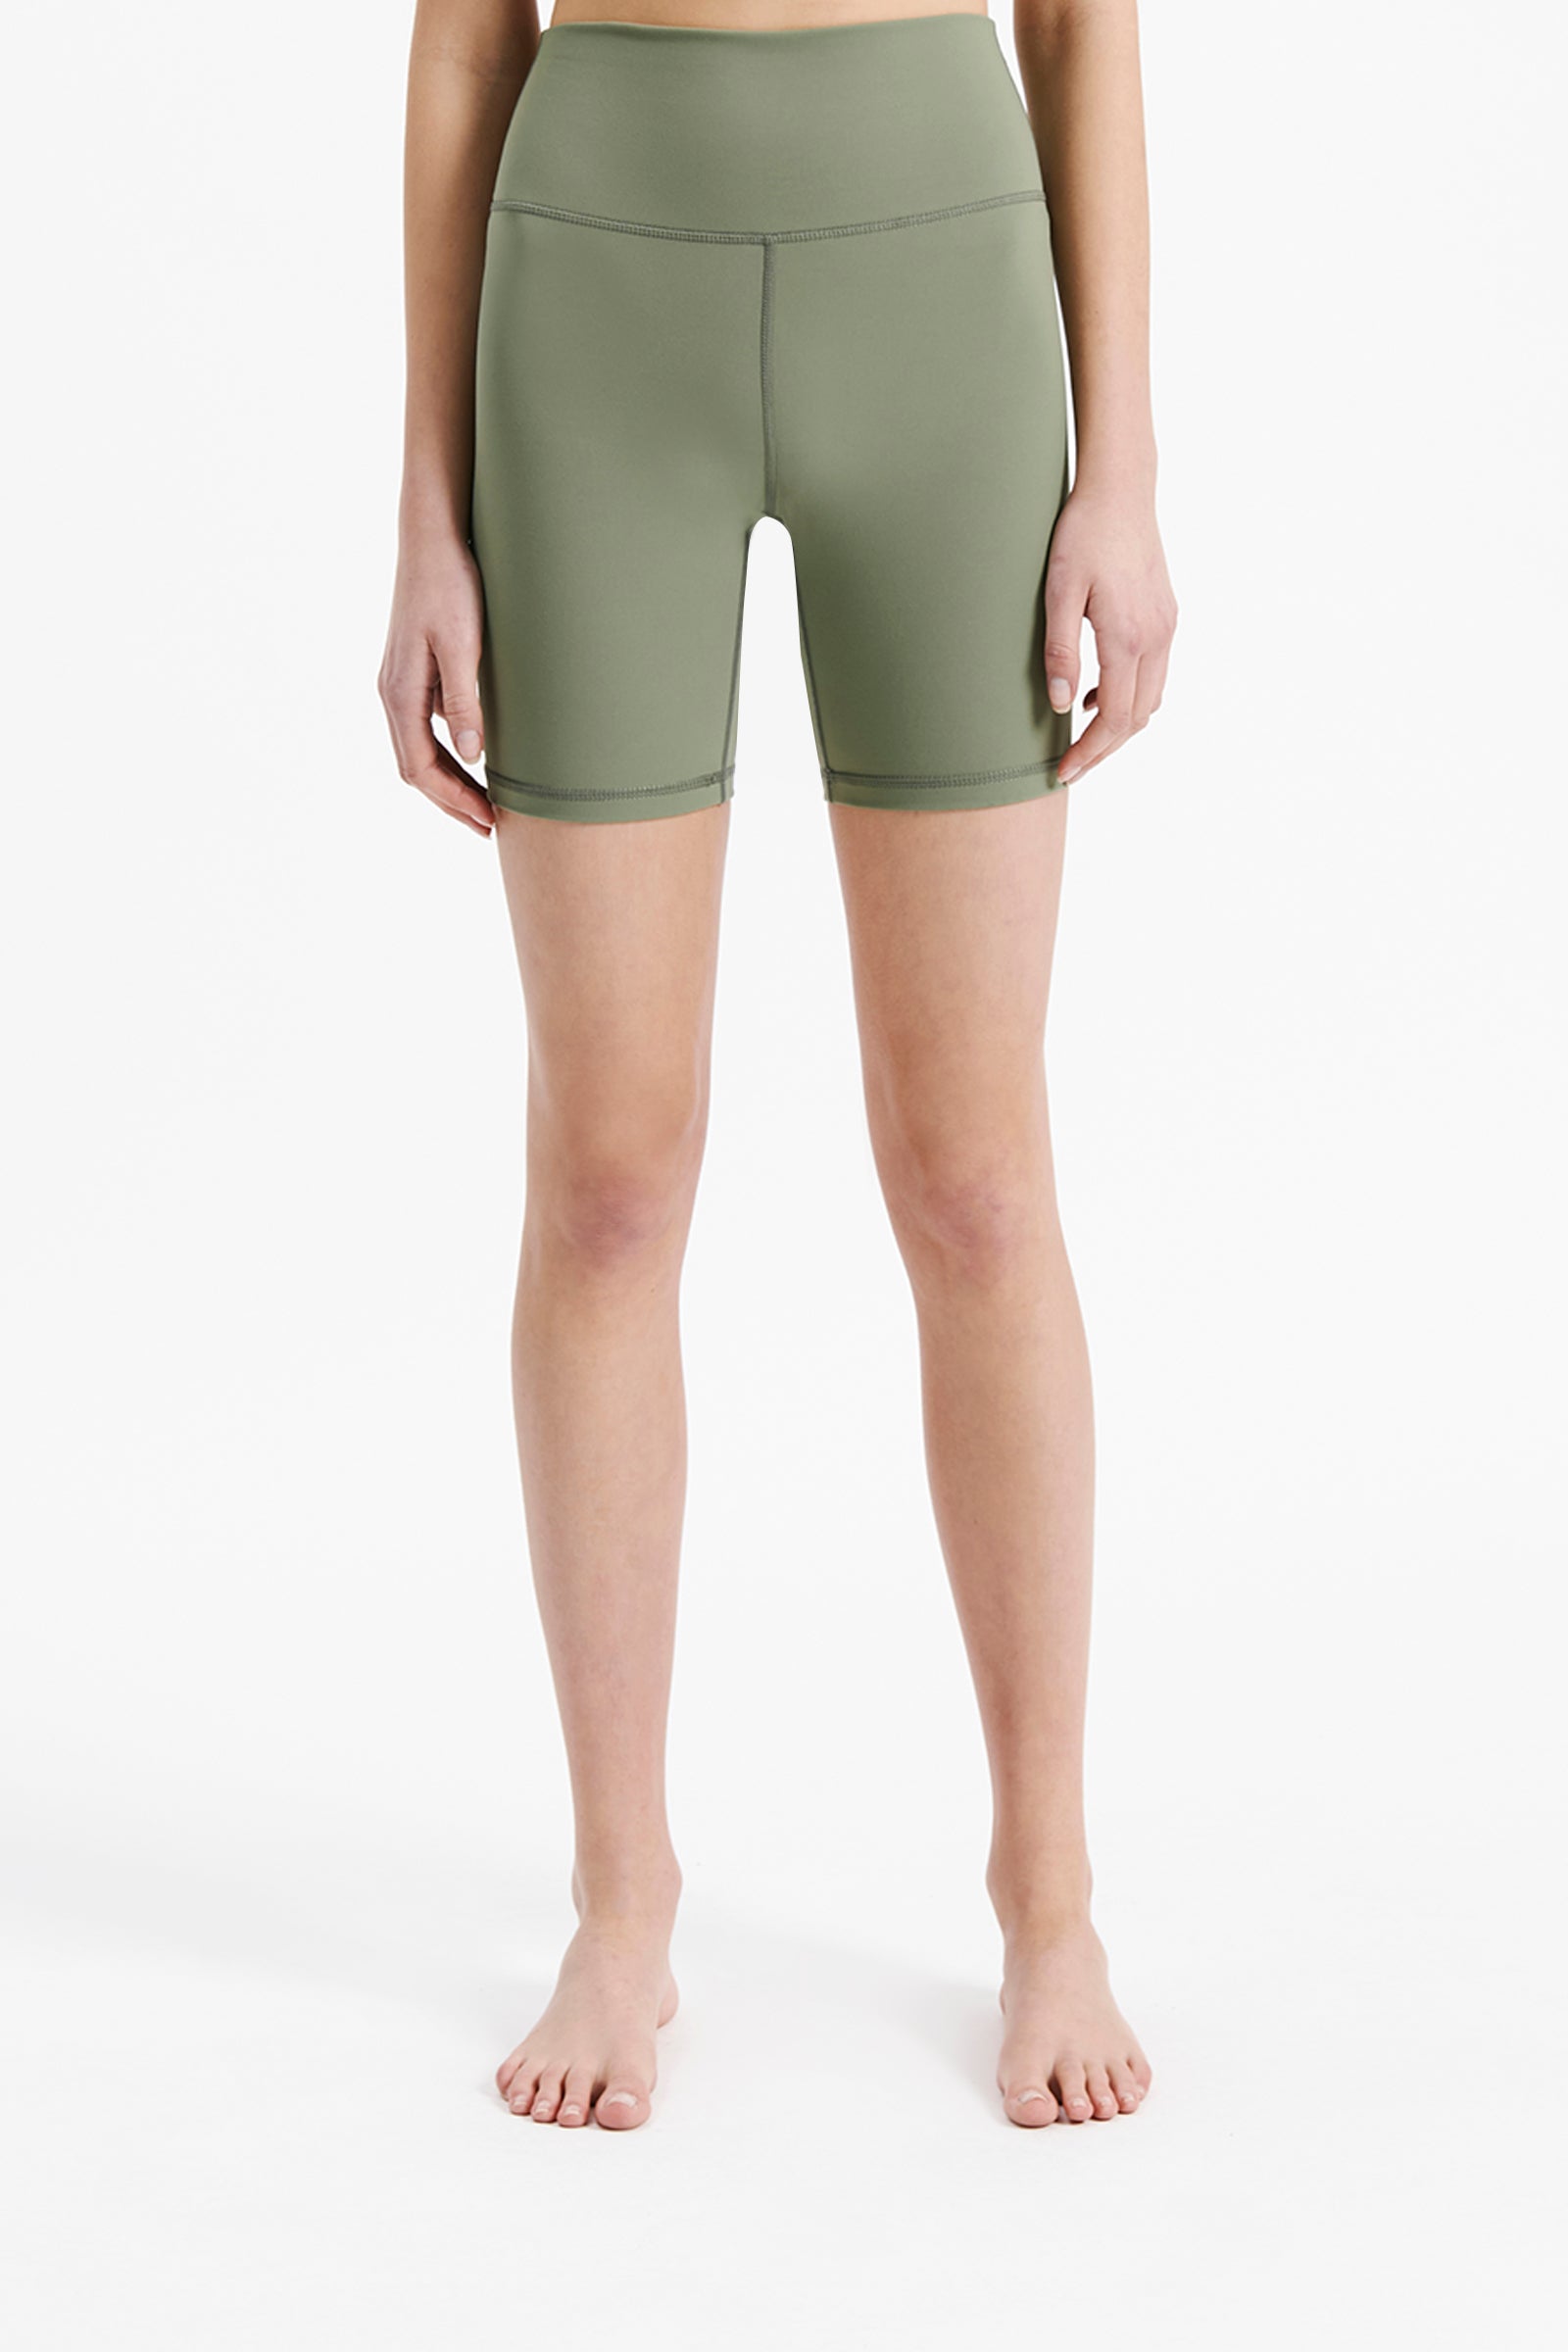 Nude Lucy Nude Active Bike Short In a Green Willow Colour